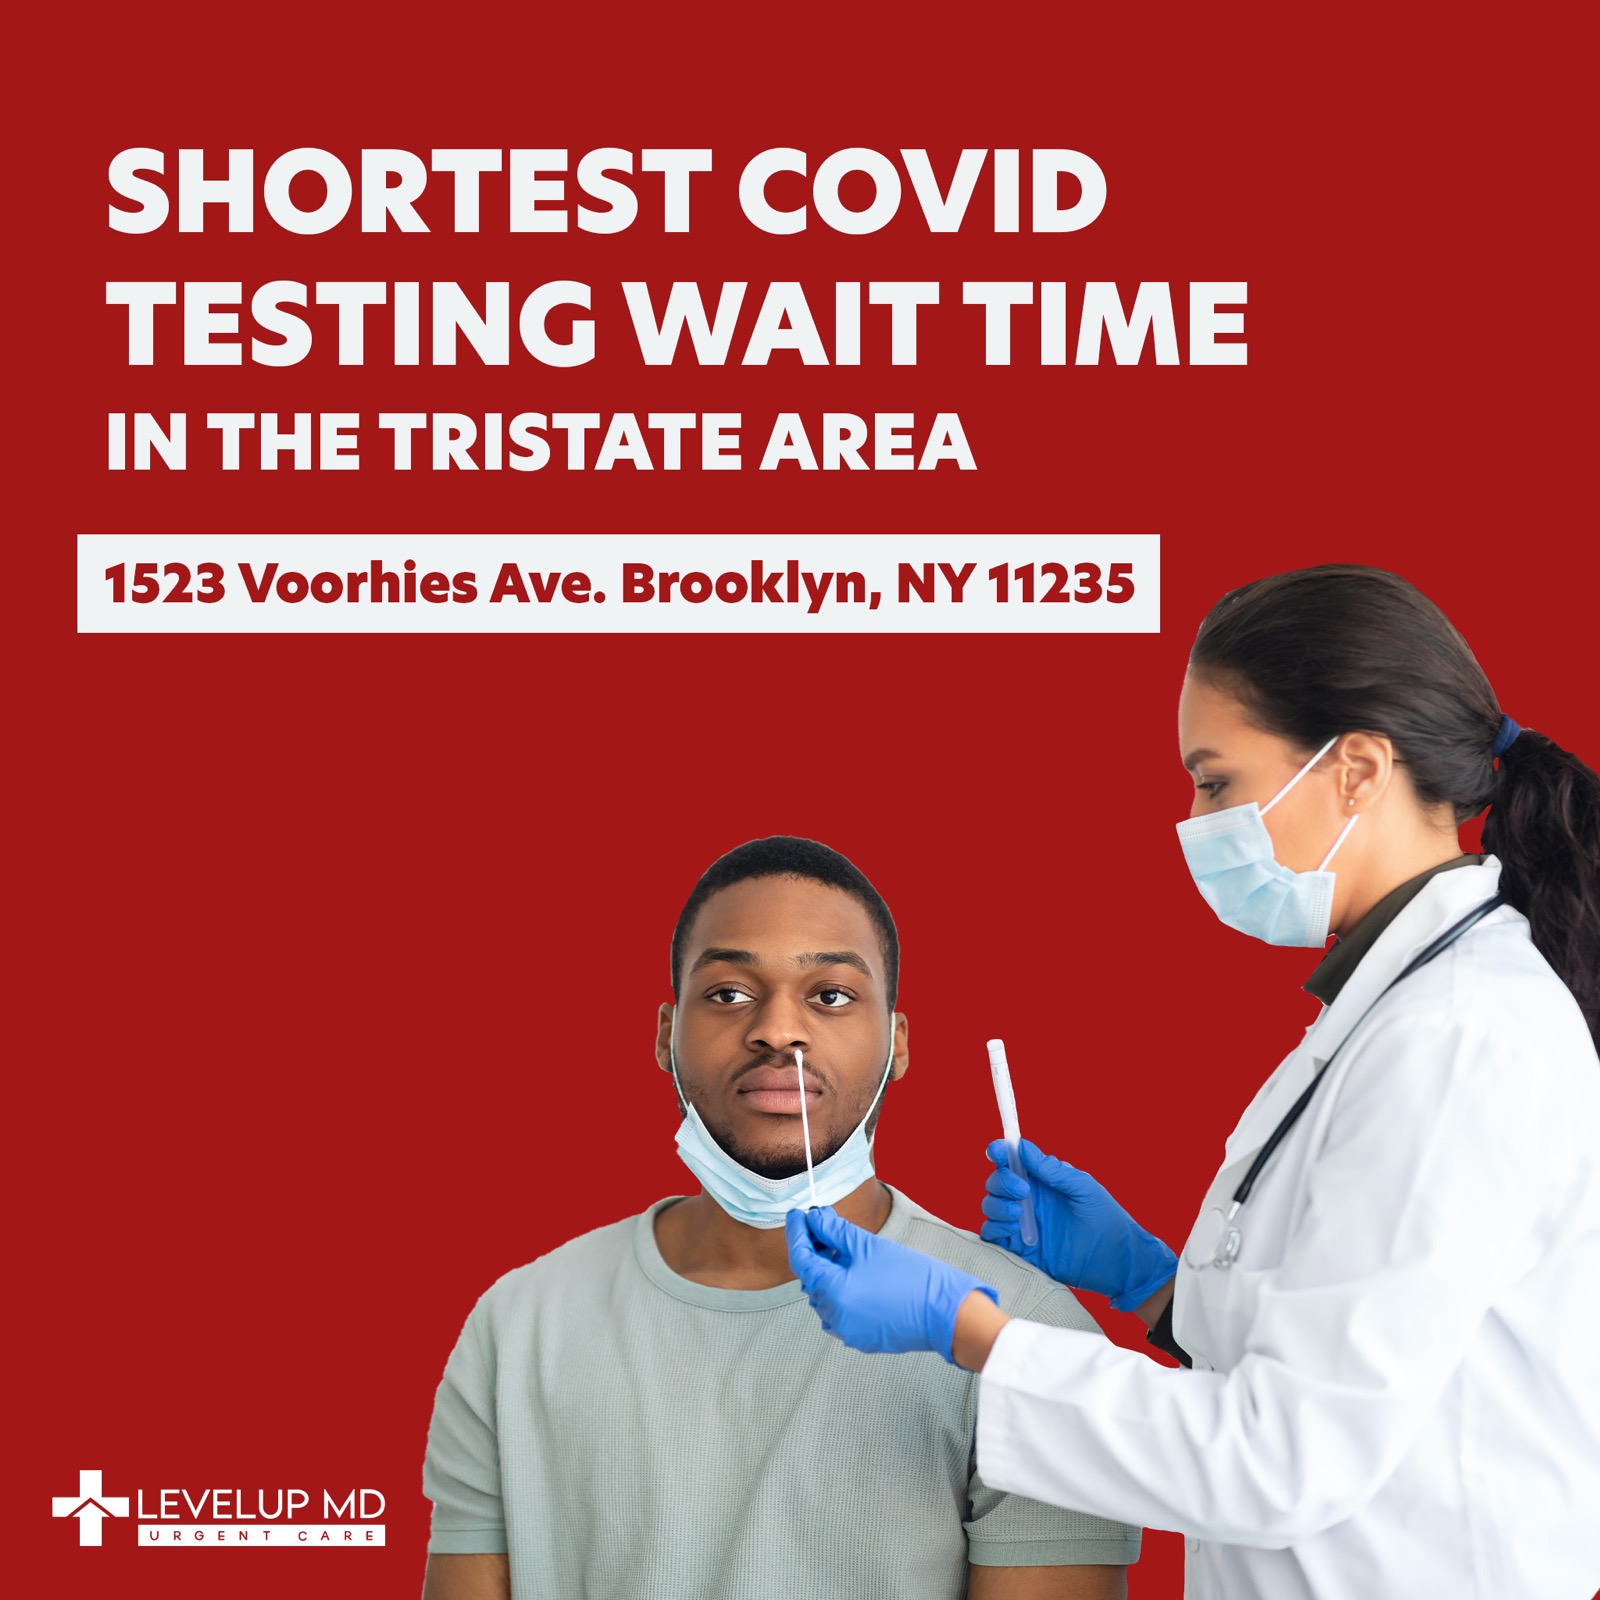 Shortest COVID Testing Wait Time in the Tristate Area - 1523 Voorhies Ave. Brooklyn, NY 11235 - LevelUp MD Urgent Care